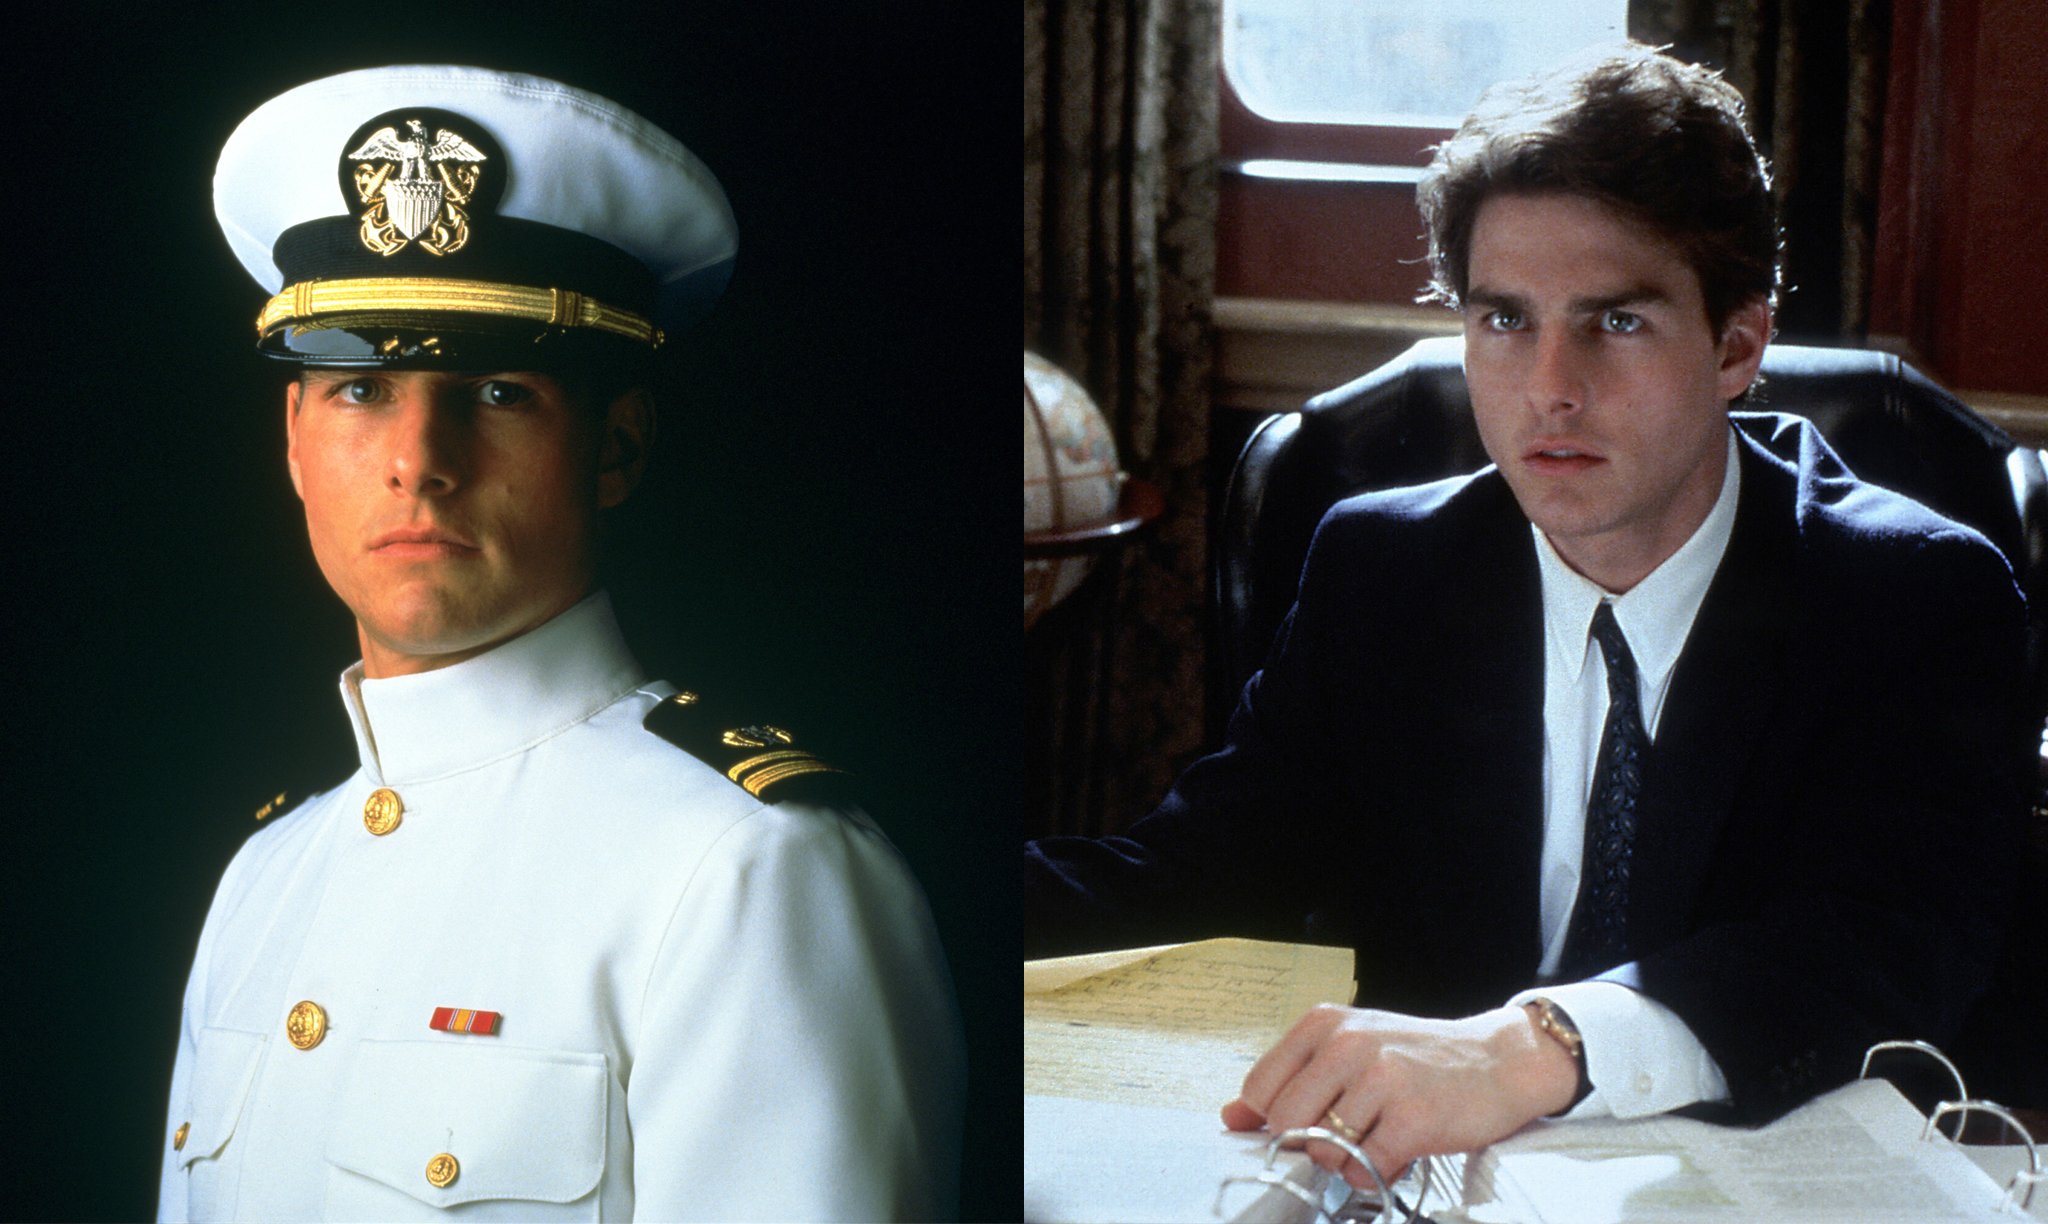 Tom Cruise's legal drama films both received critical acclaim, grossing over $240 million each